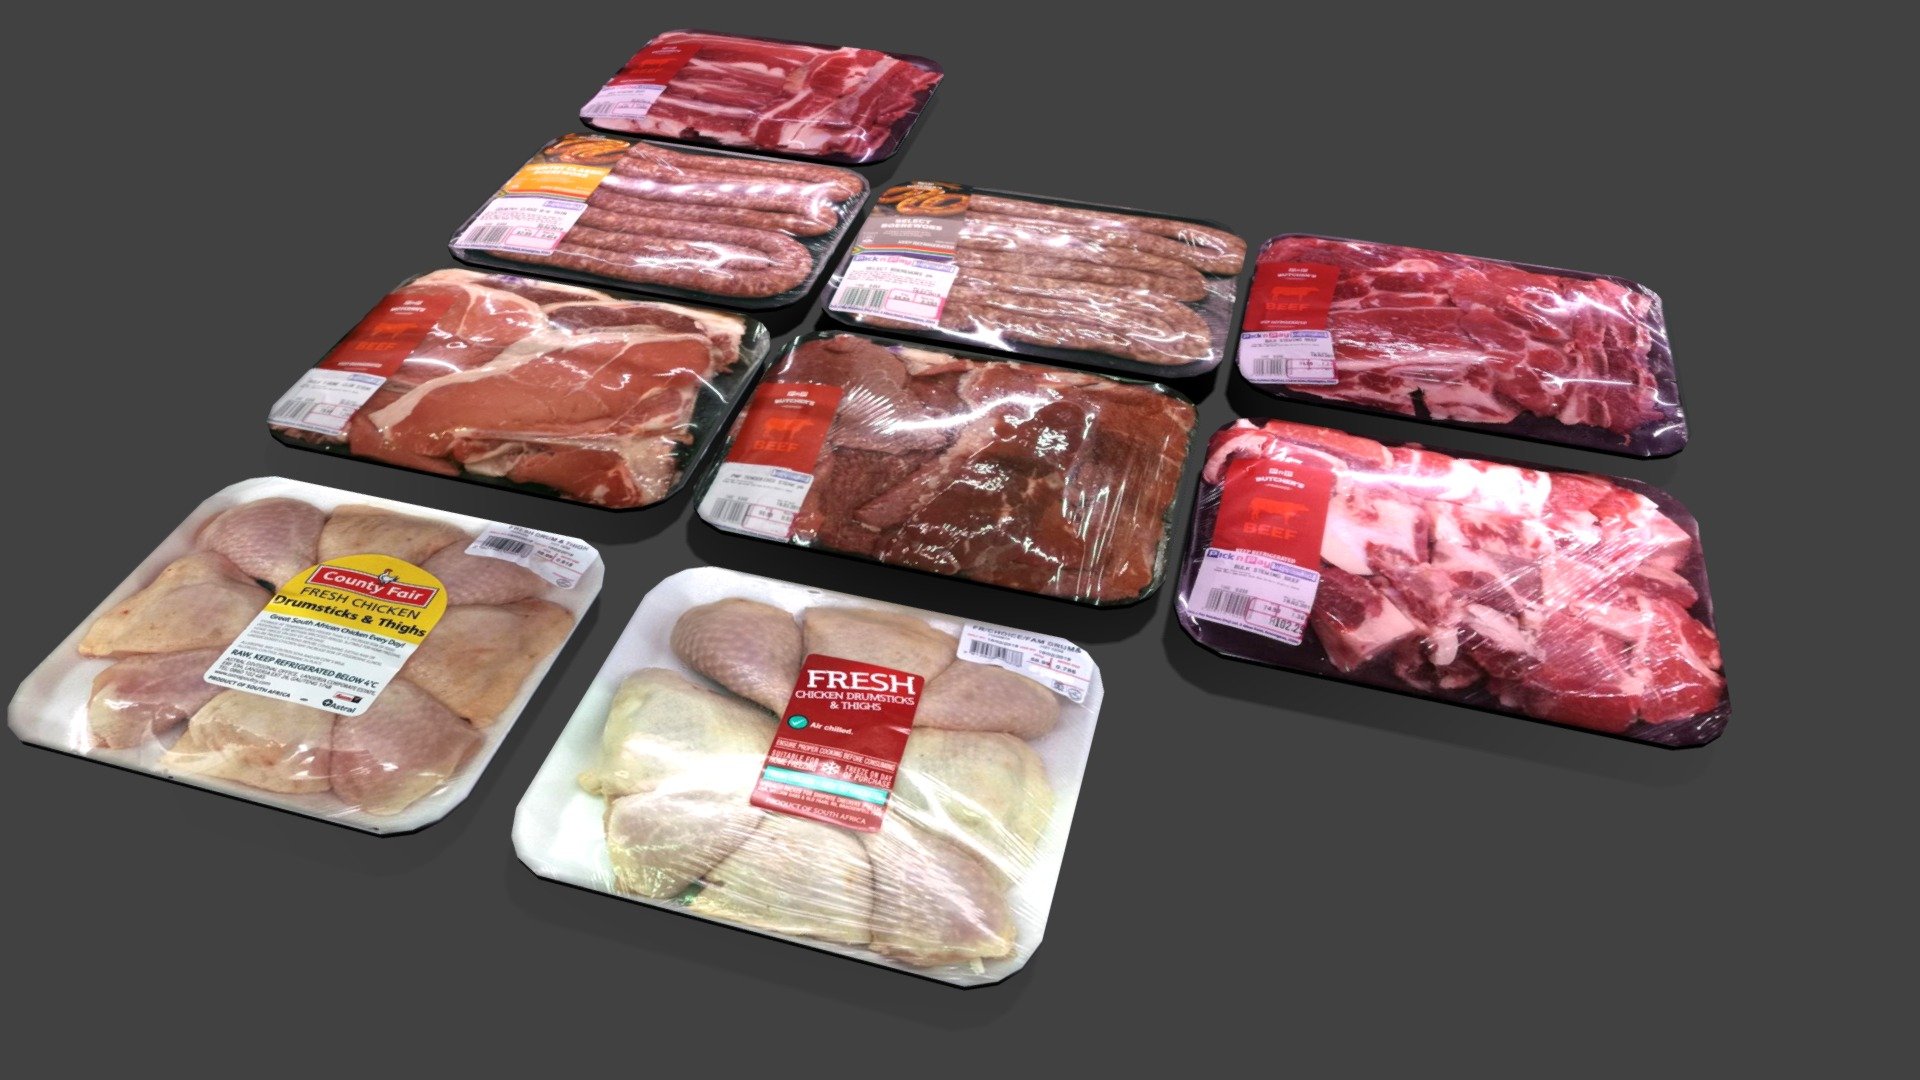 This is a pack for shop or store cold fridge meat section including the following components:

Chops
Steak
Meat strip
Chicken drumstick
Sausage / wors
Scale: Real world, Metric

File formats:

Blender 2.79 / Cycles - Native
Max 2015 Scanline
FBX - Export from Max, Tested in Blender

UVW Texture coordinates: UVW Unwrapped

Pivots: At opbject bases - Cold Area Meat Section kit for shop or store - Buy Royalty Free 3D model by 3D Content Online (@hknoblauch) 3d model